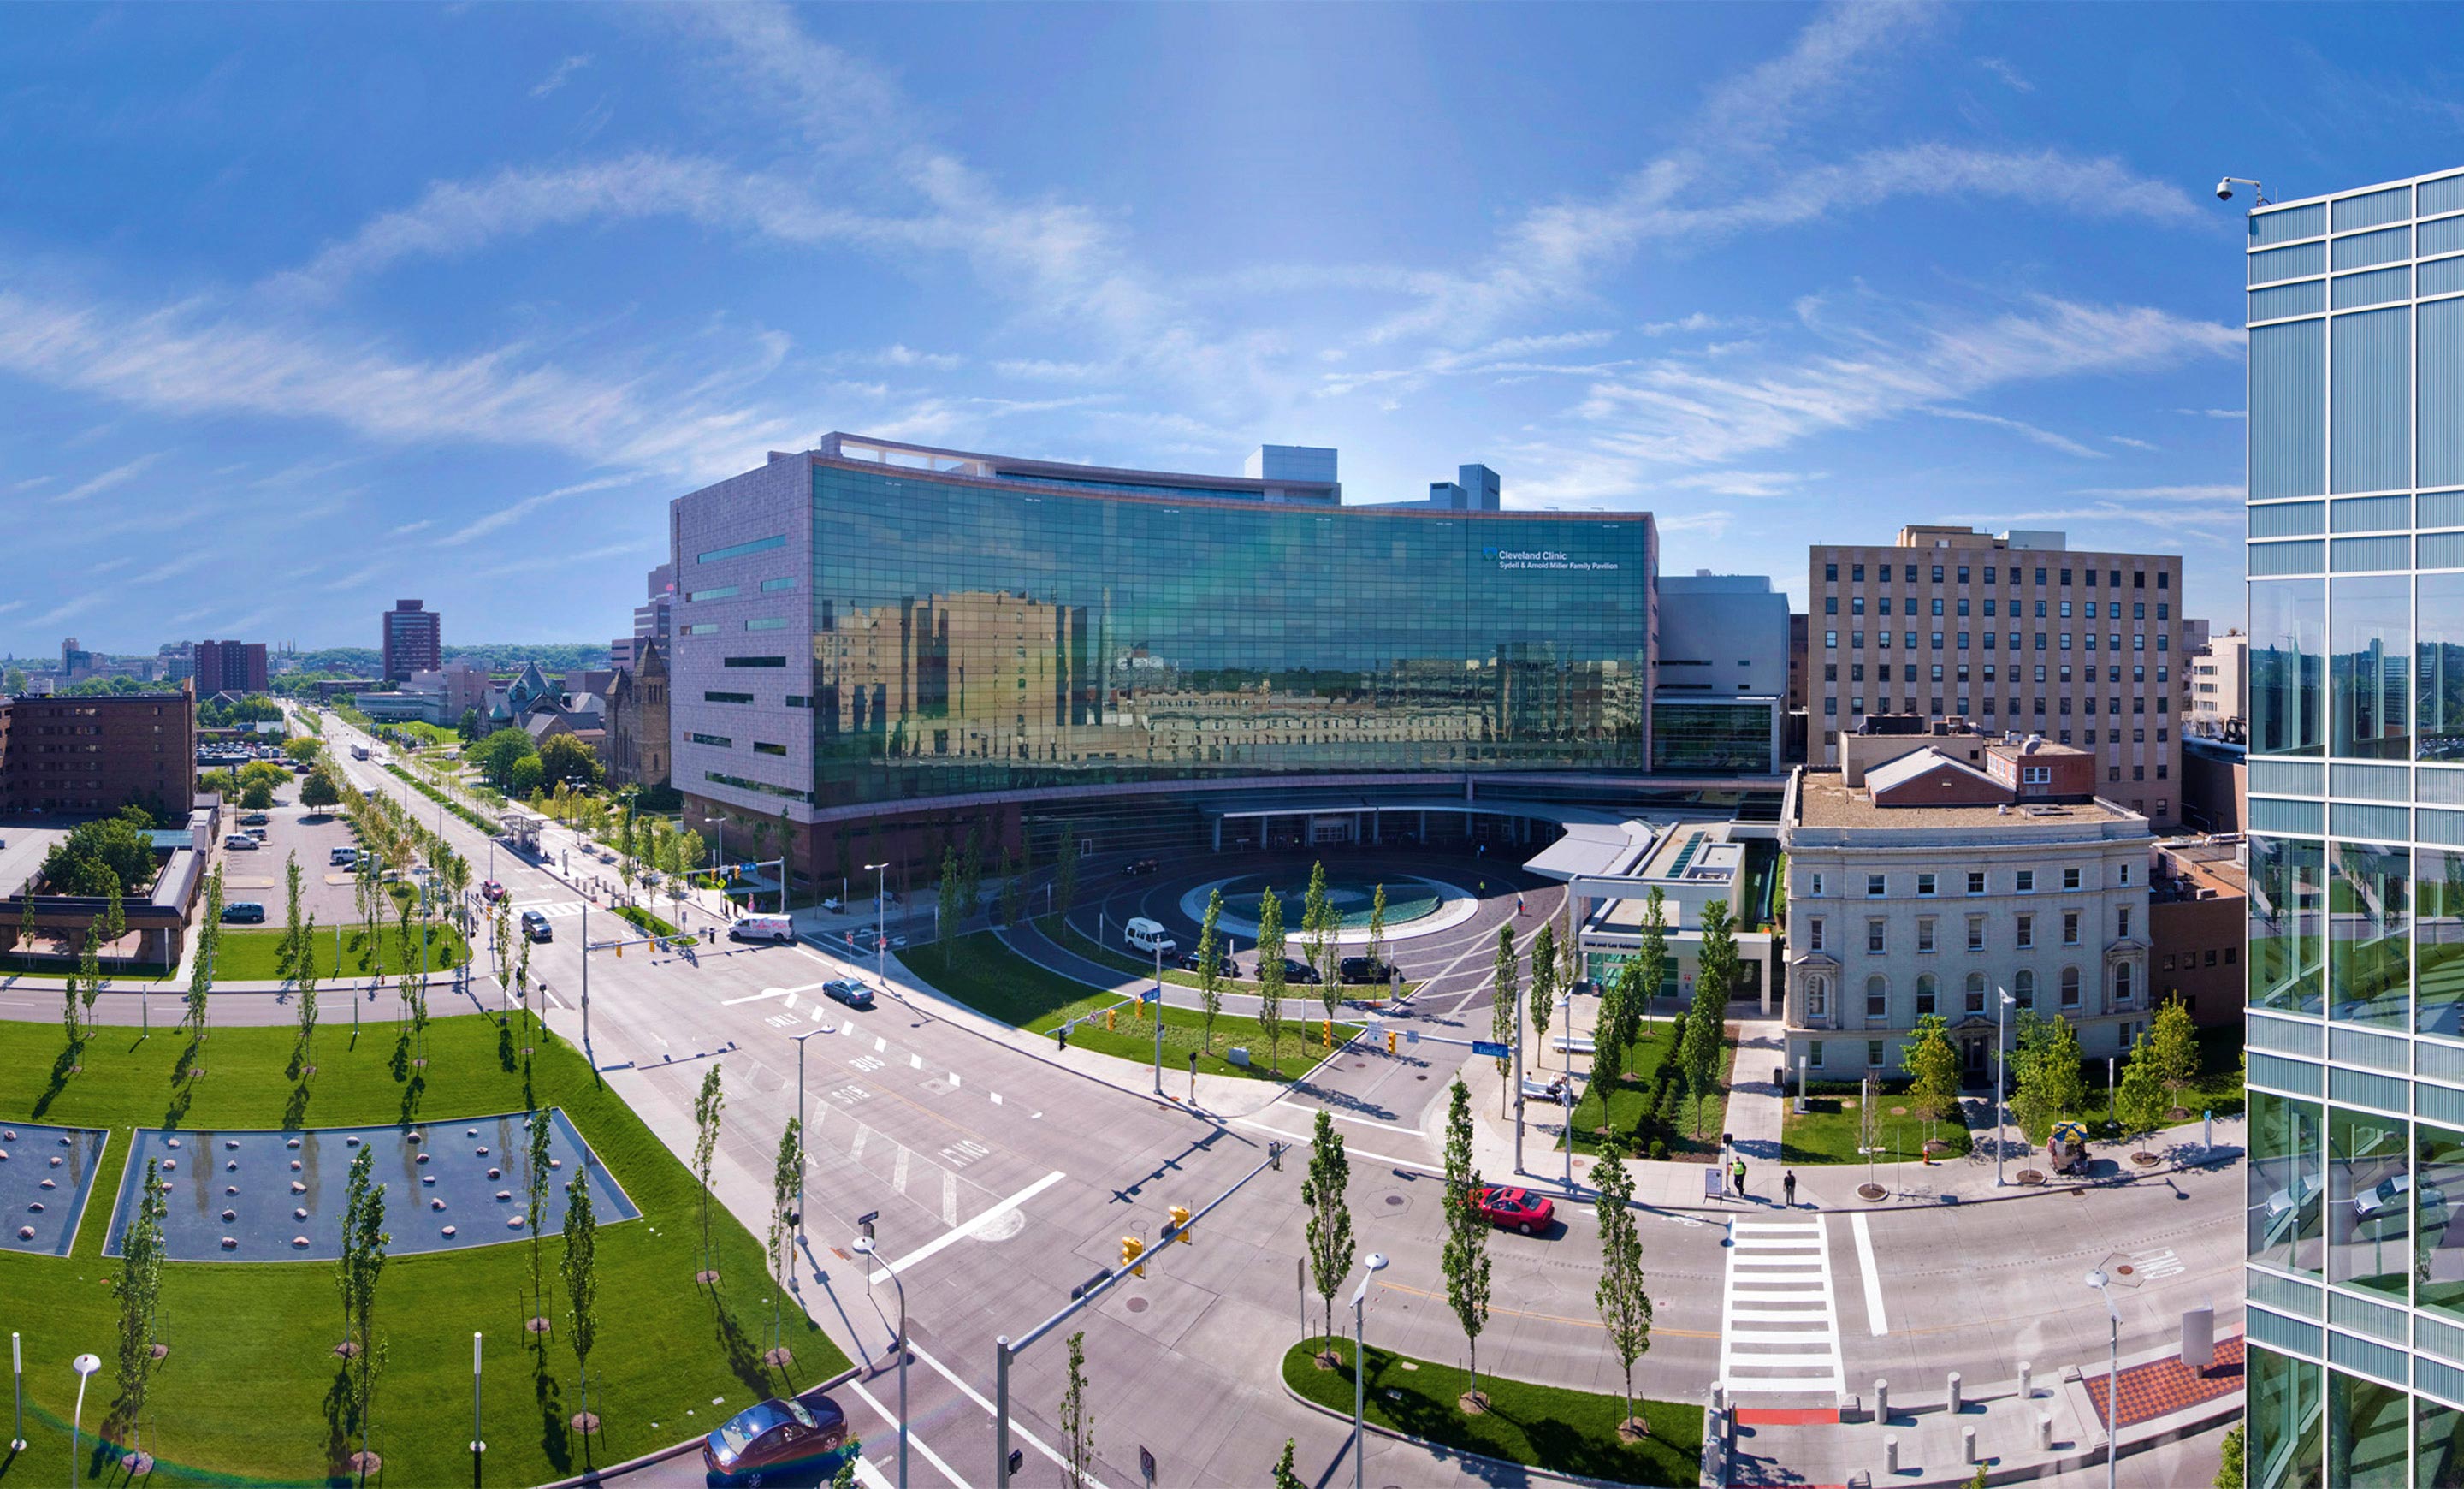 Cleveland Clinic Main Campus Map 2020 Visitor Guide for Main Campus | Cleveland Clinic